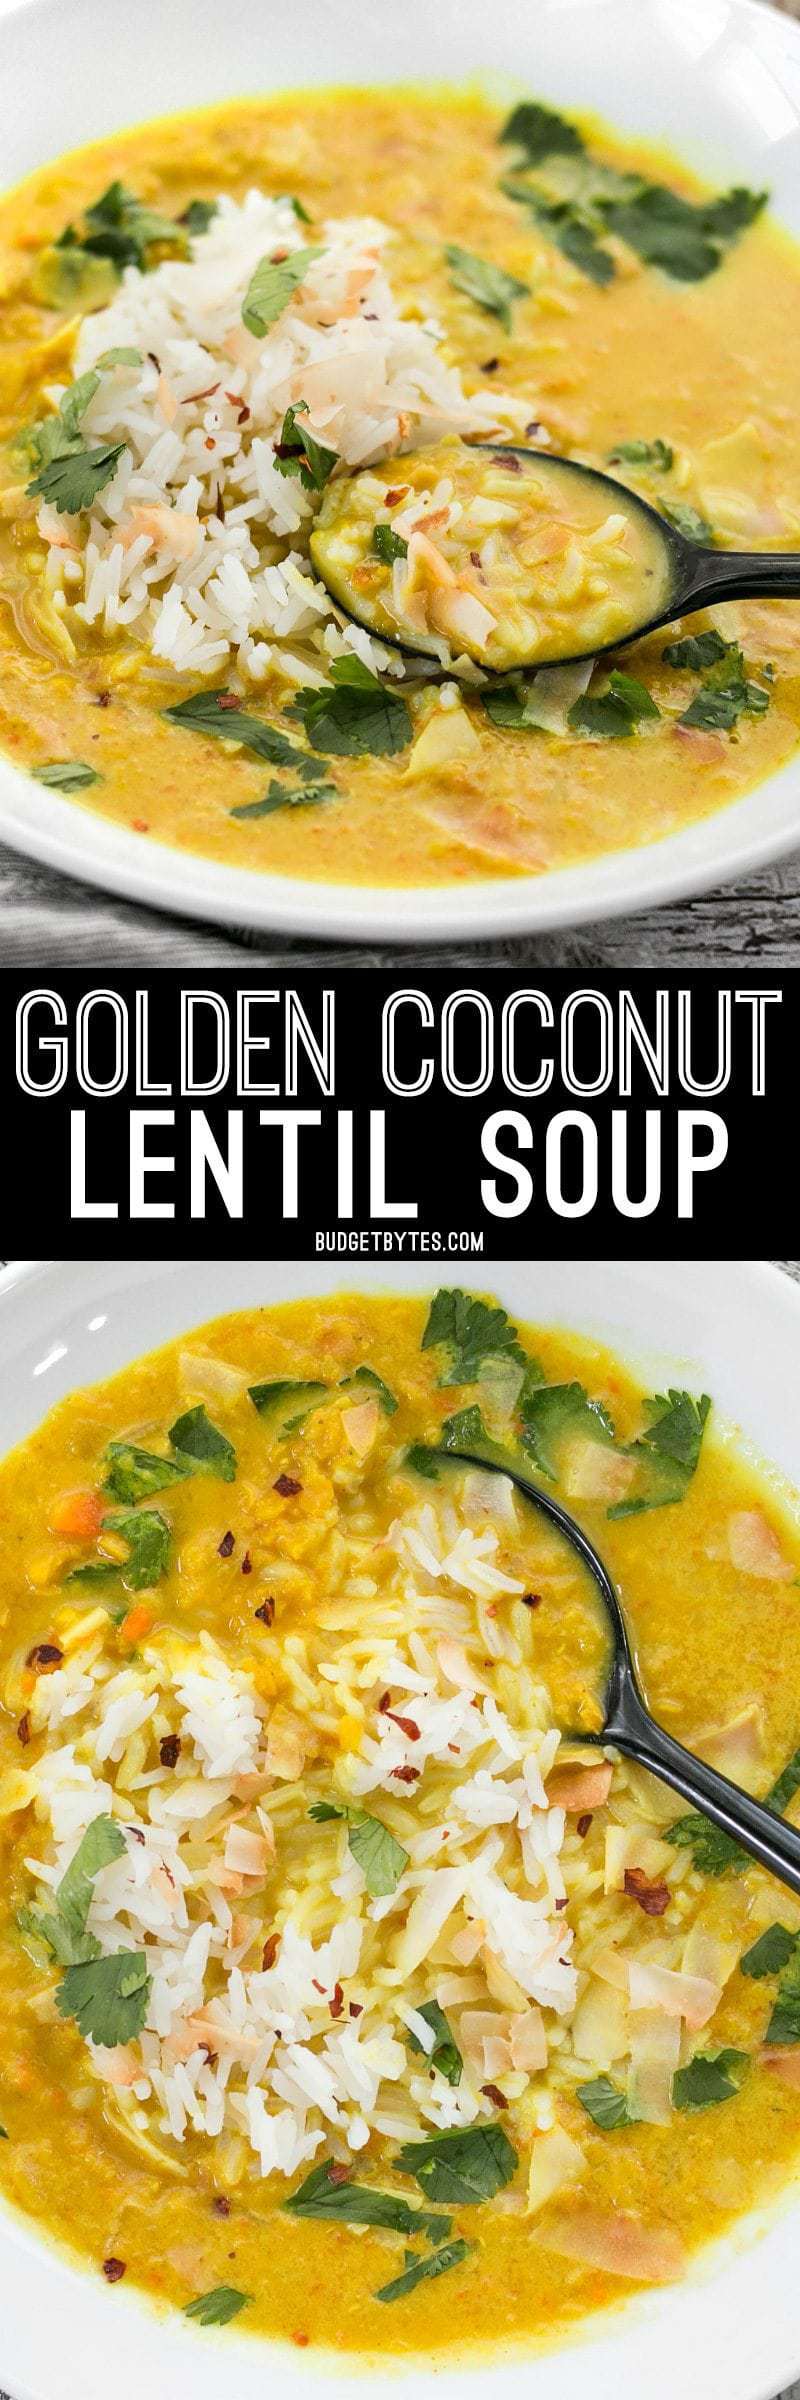 Golden Coconut Lentil Soup is a light and fresh bowl with vibrant turmeric and a handful of fun toppings. BudgetBytes.com